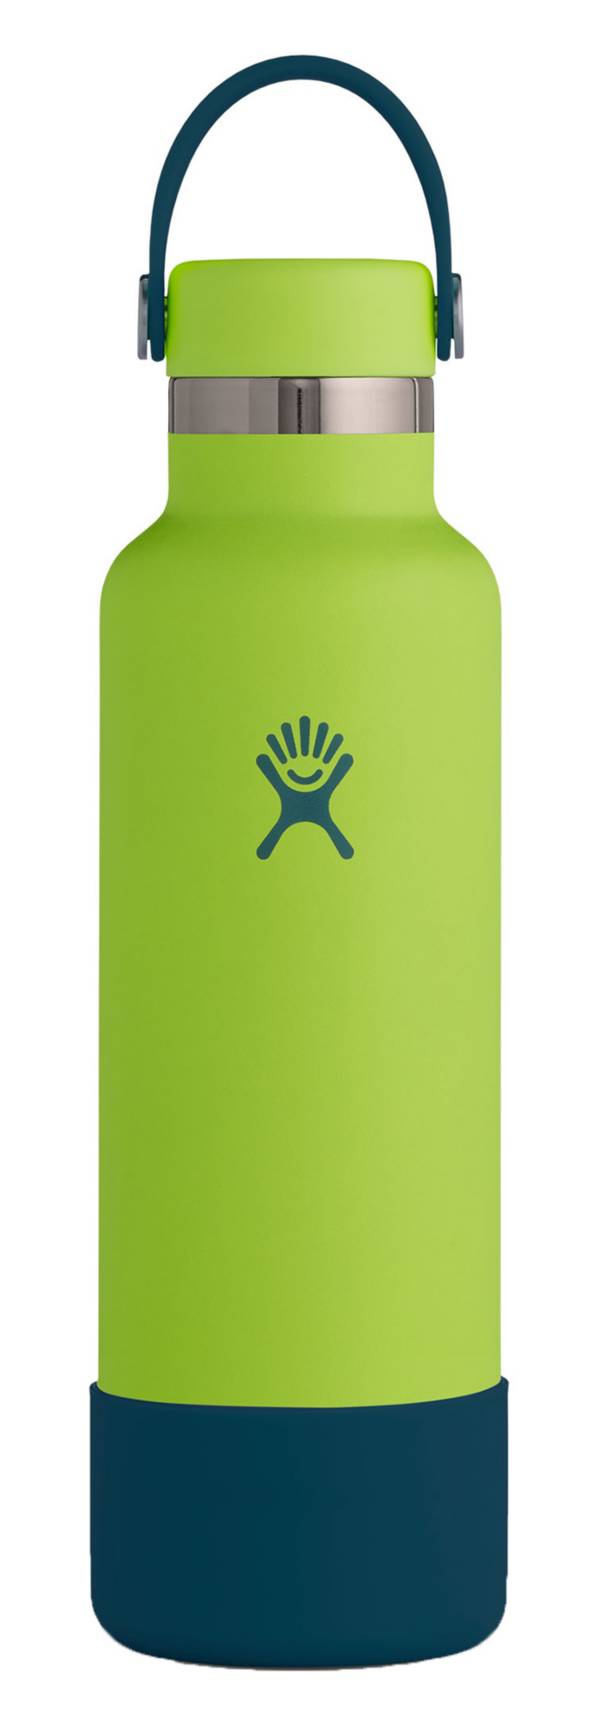 Hydro Flask Movement Collection 21 oz. Standard Mouth Bottle product image